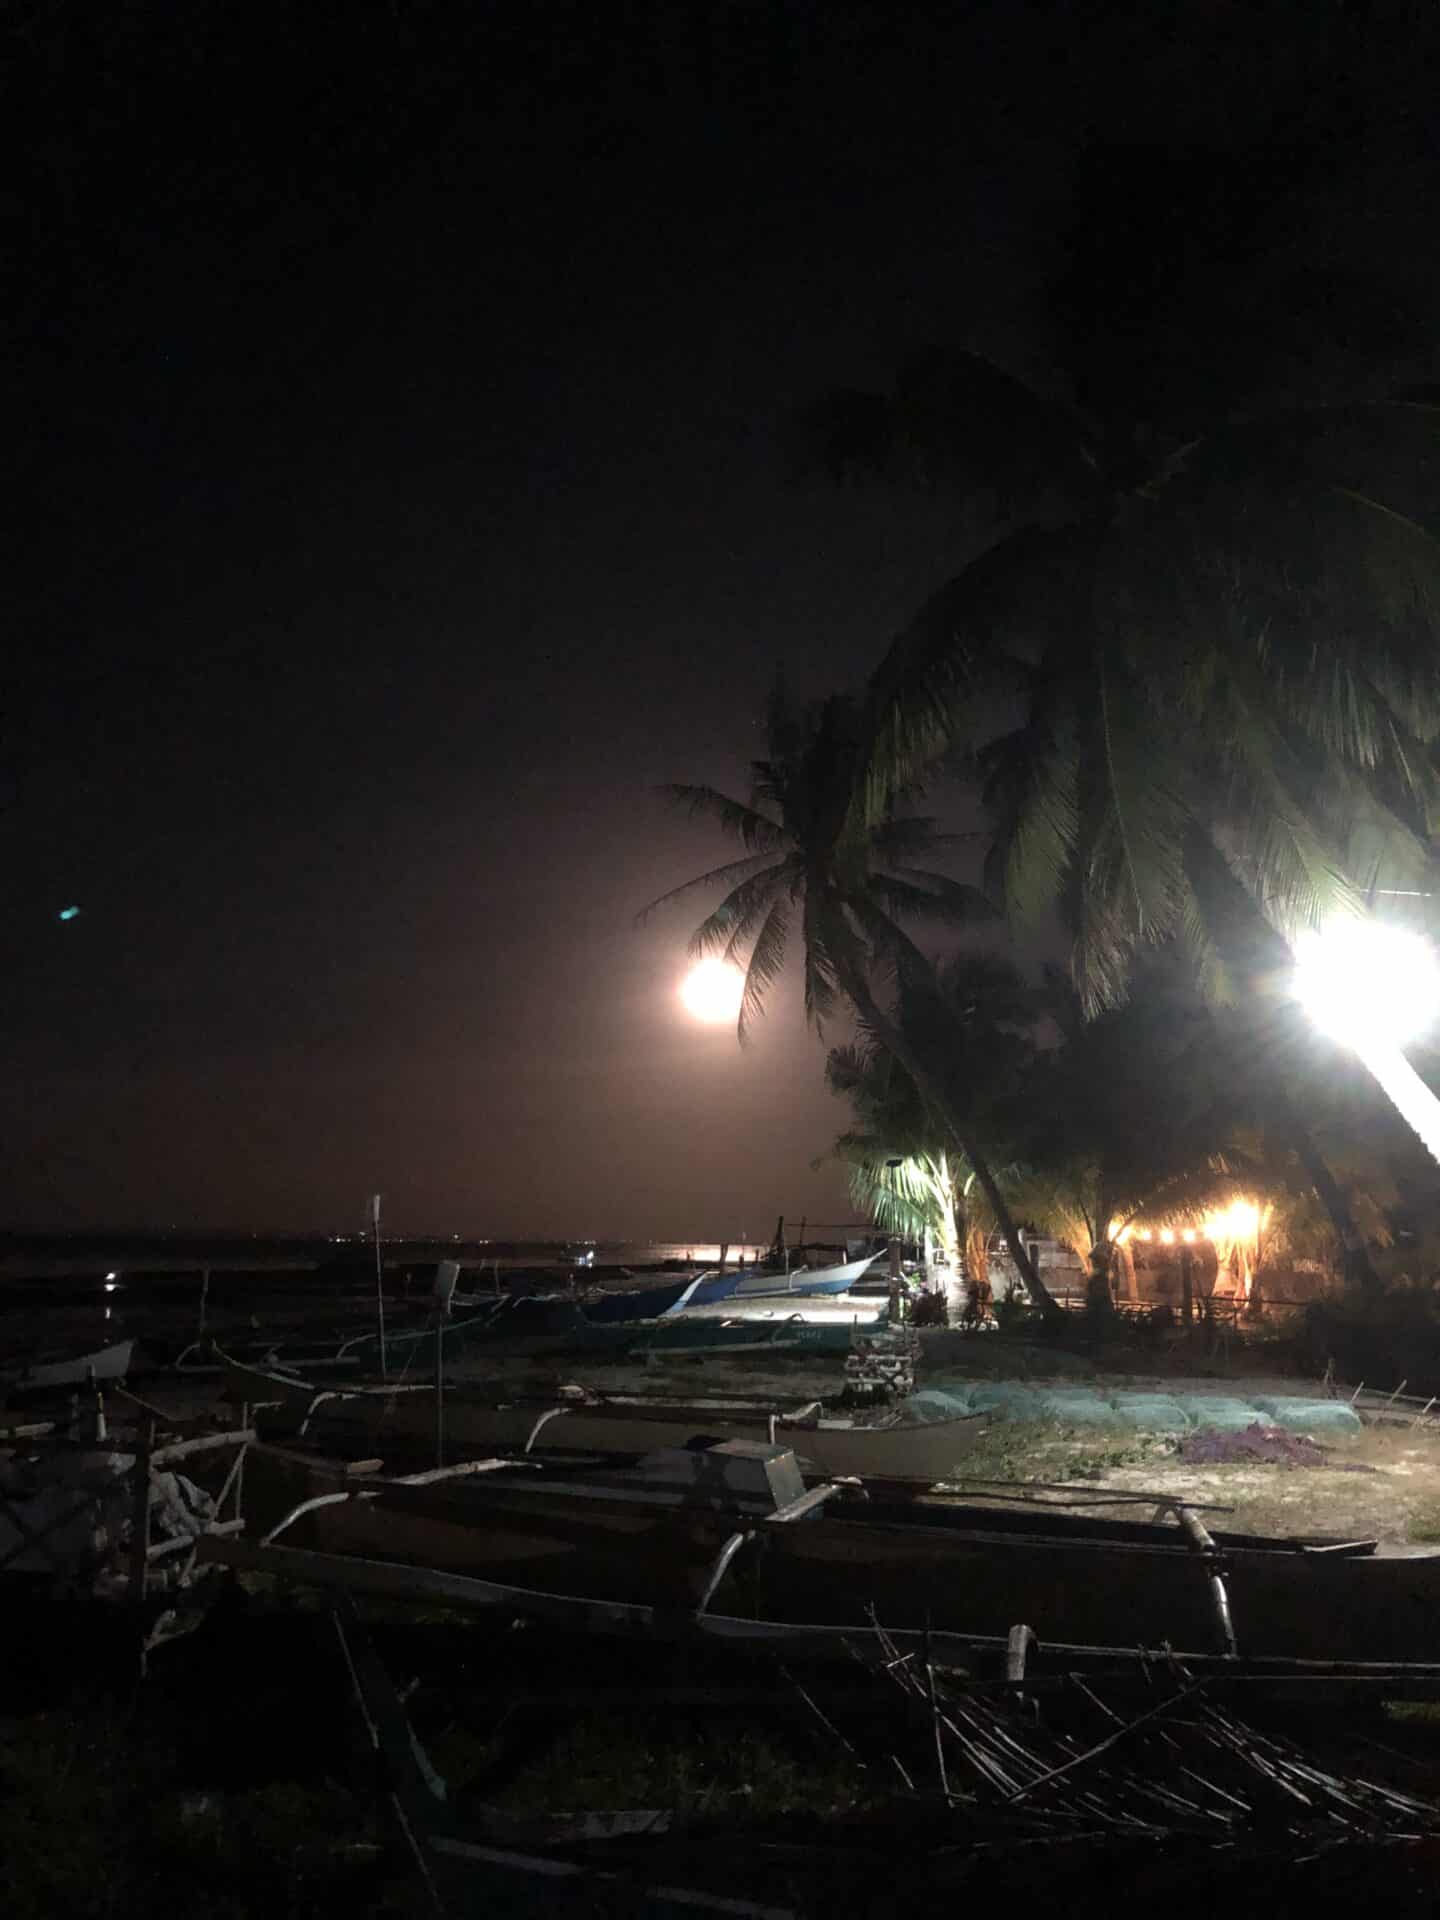 Fishing boats sitting on the beach at night.